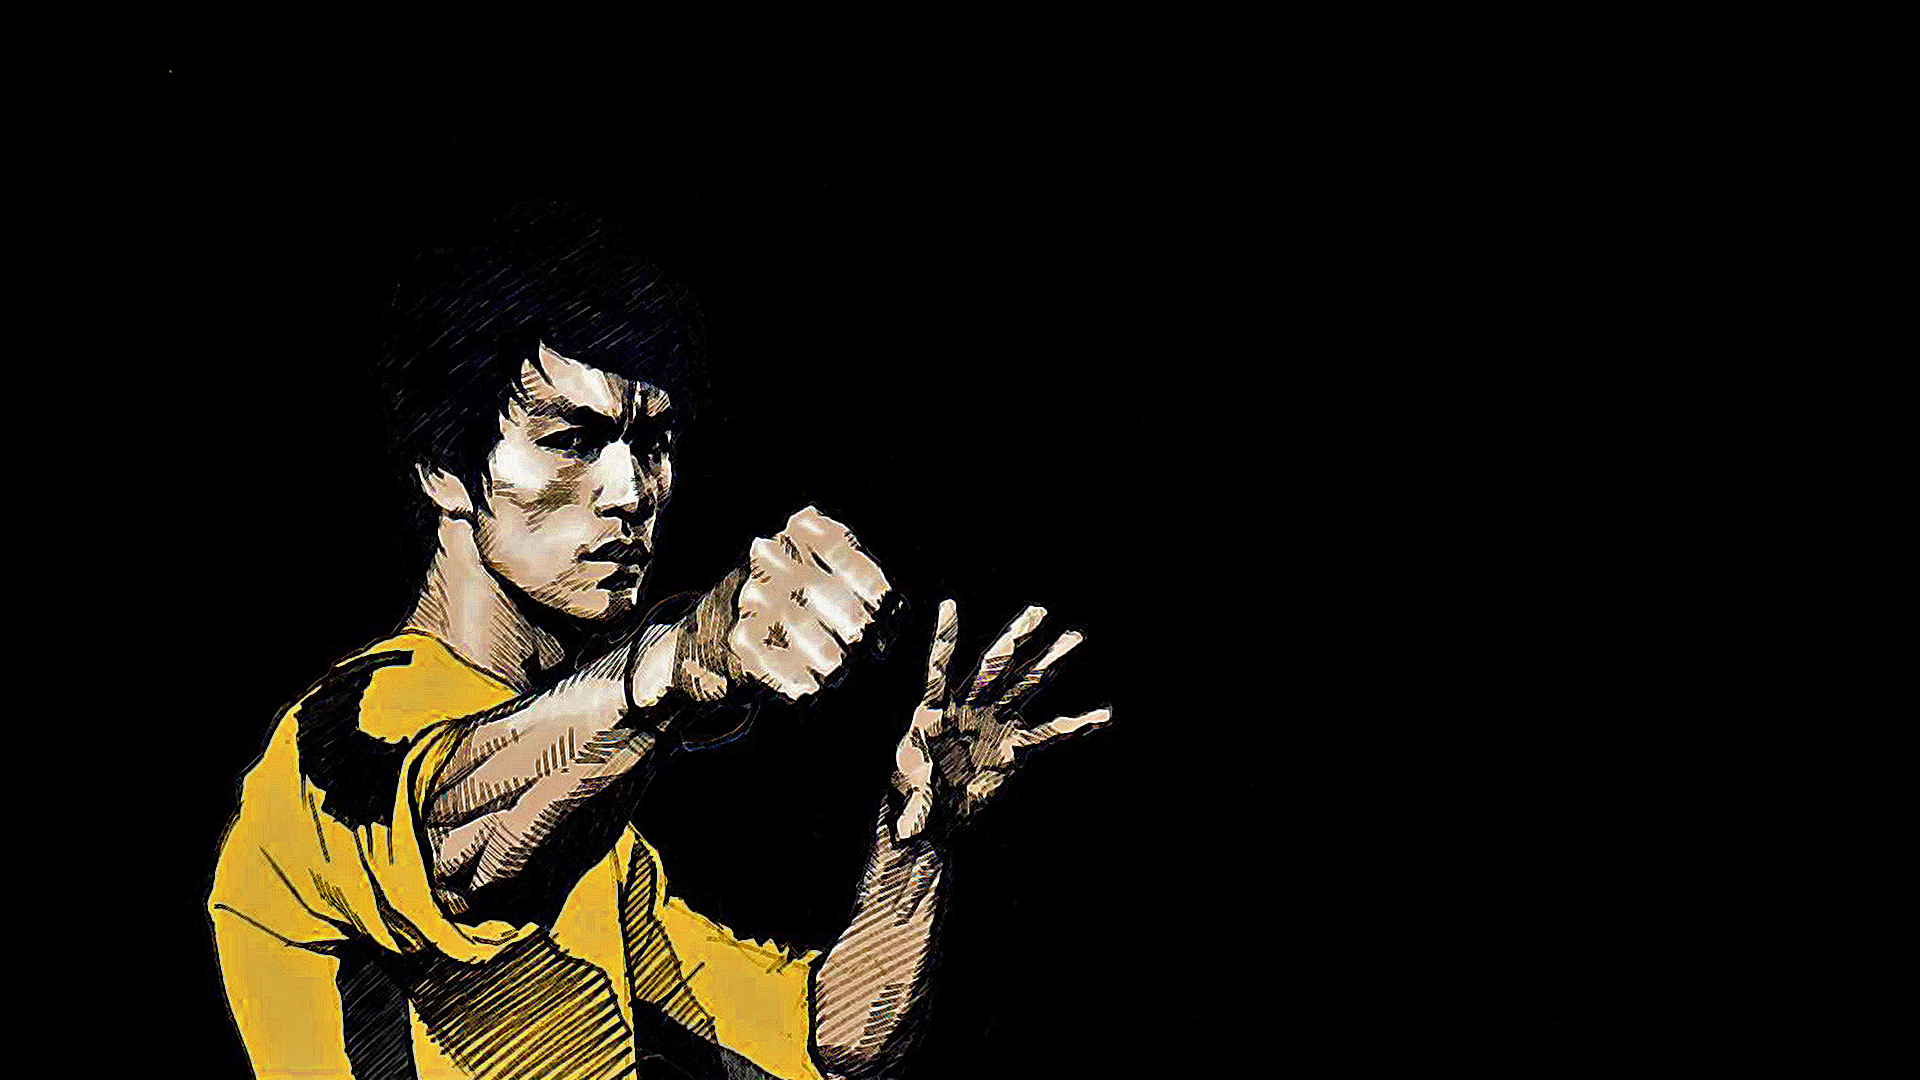 Bruce Lee Wallpapers HD kung fu punch